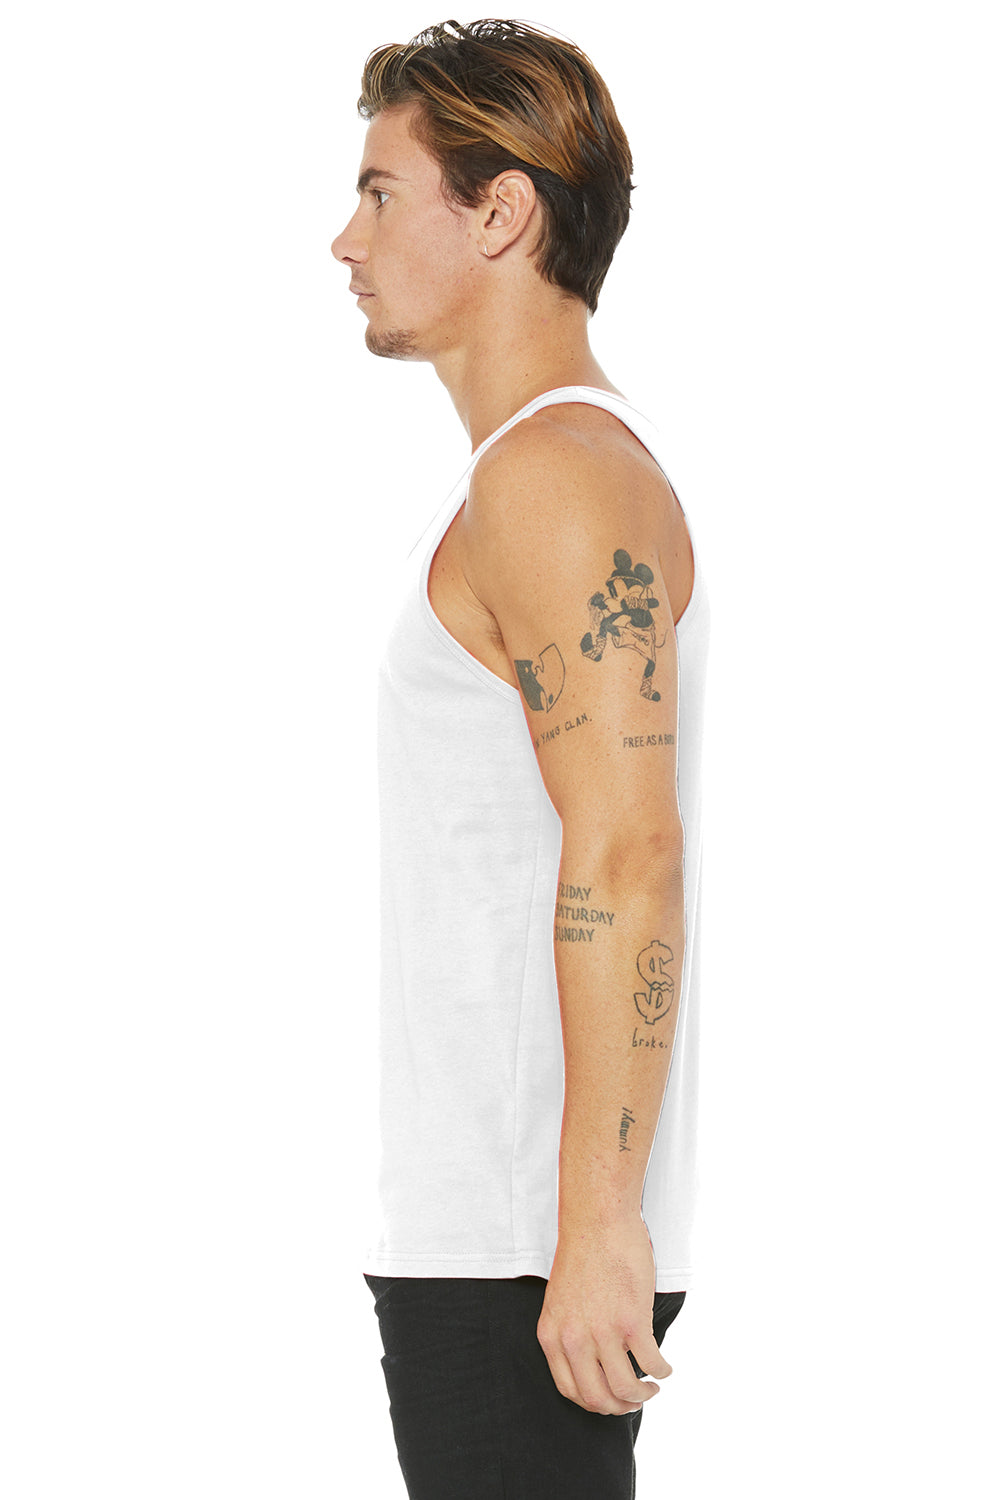 Bella + Canvas BC3480/3480 Mens Jersey Tank Top White Model Side